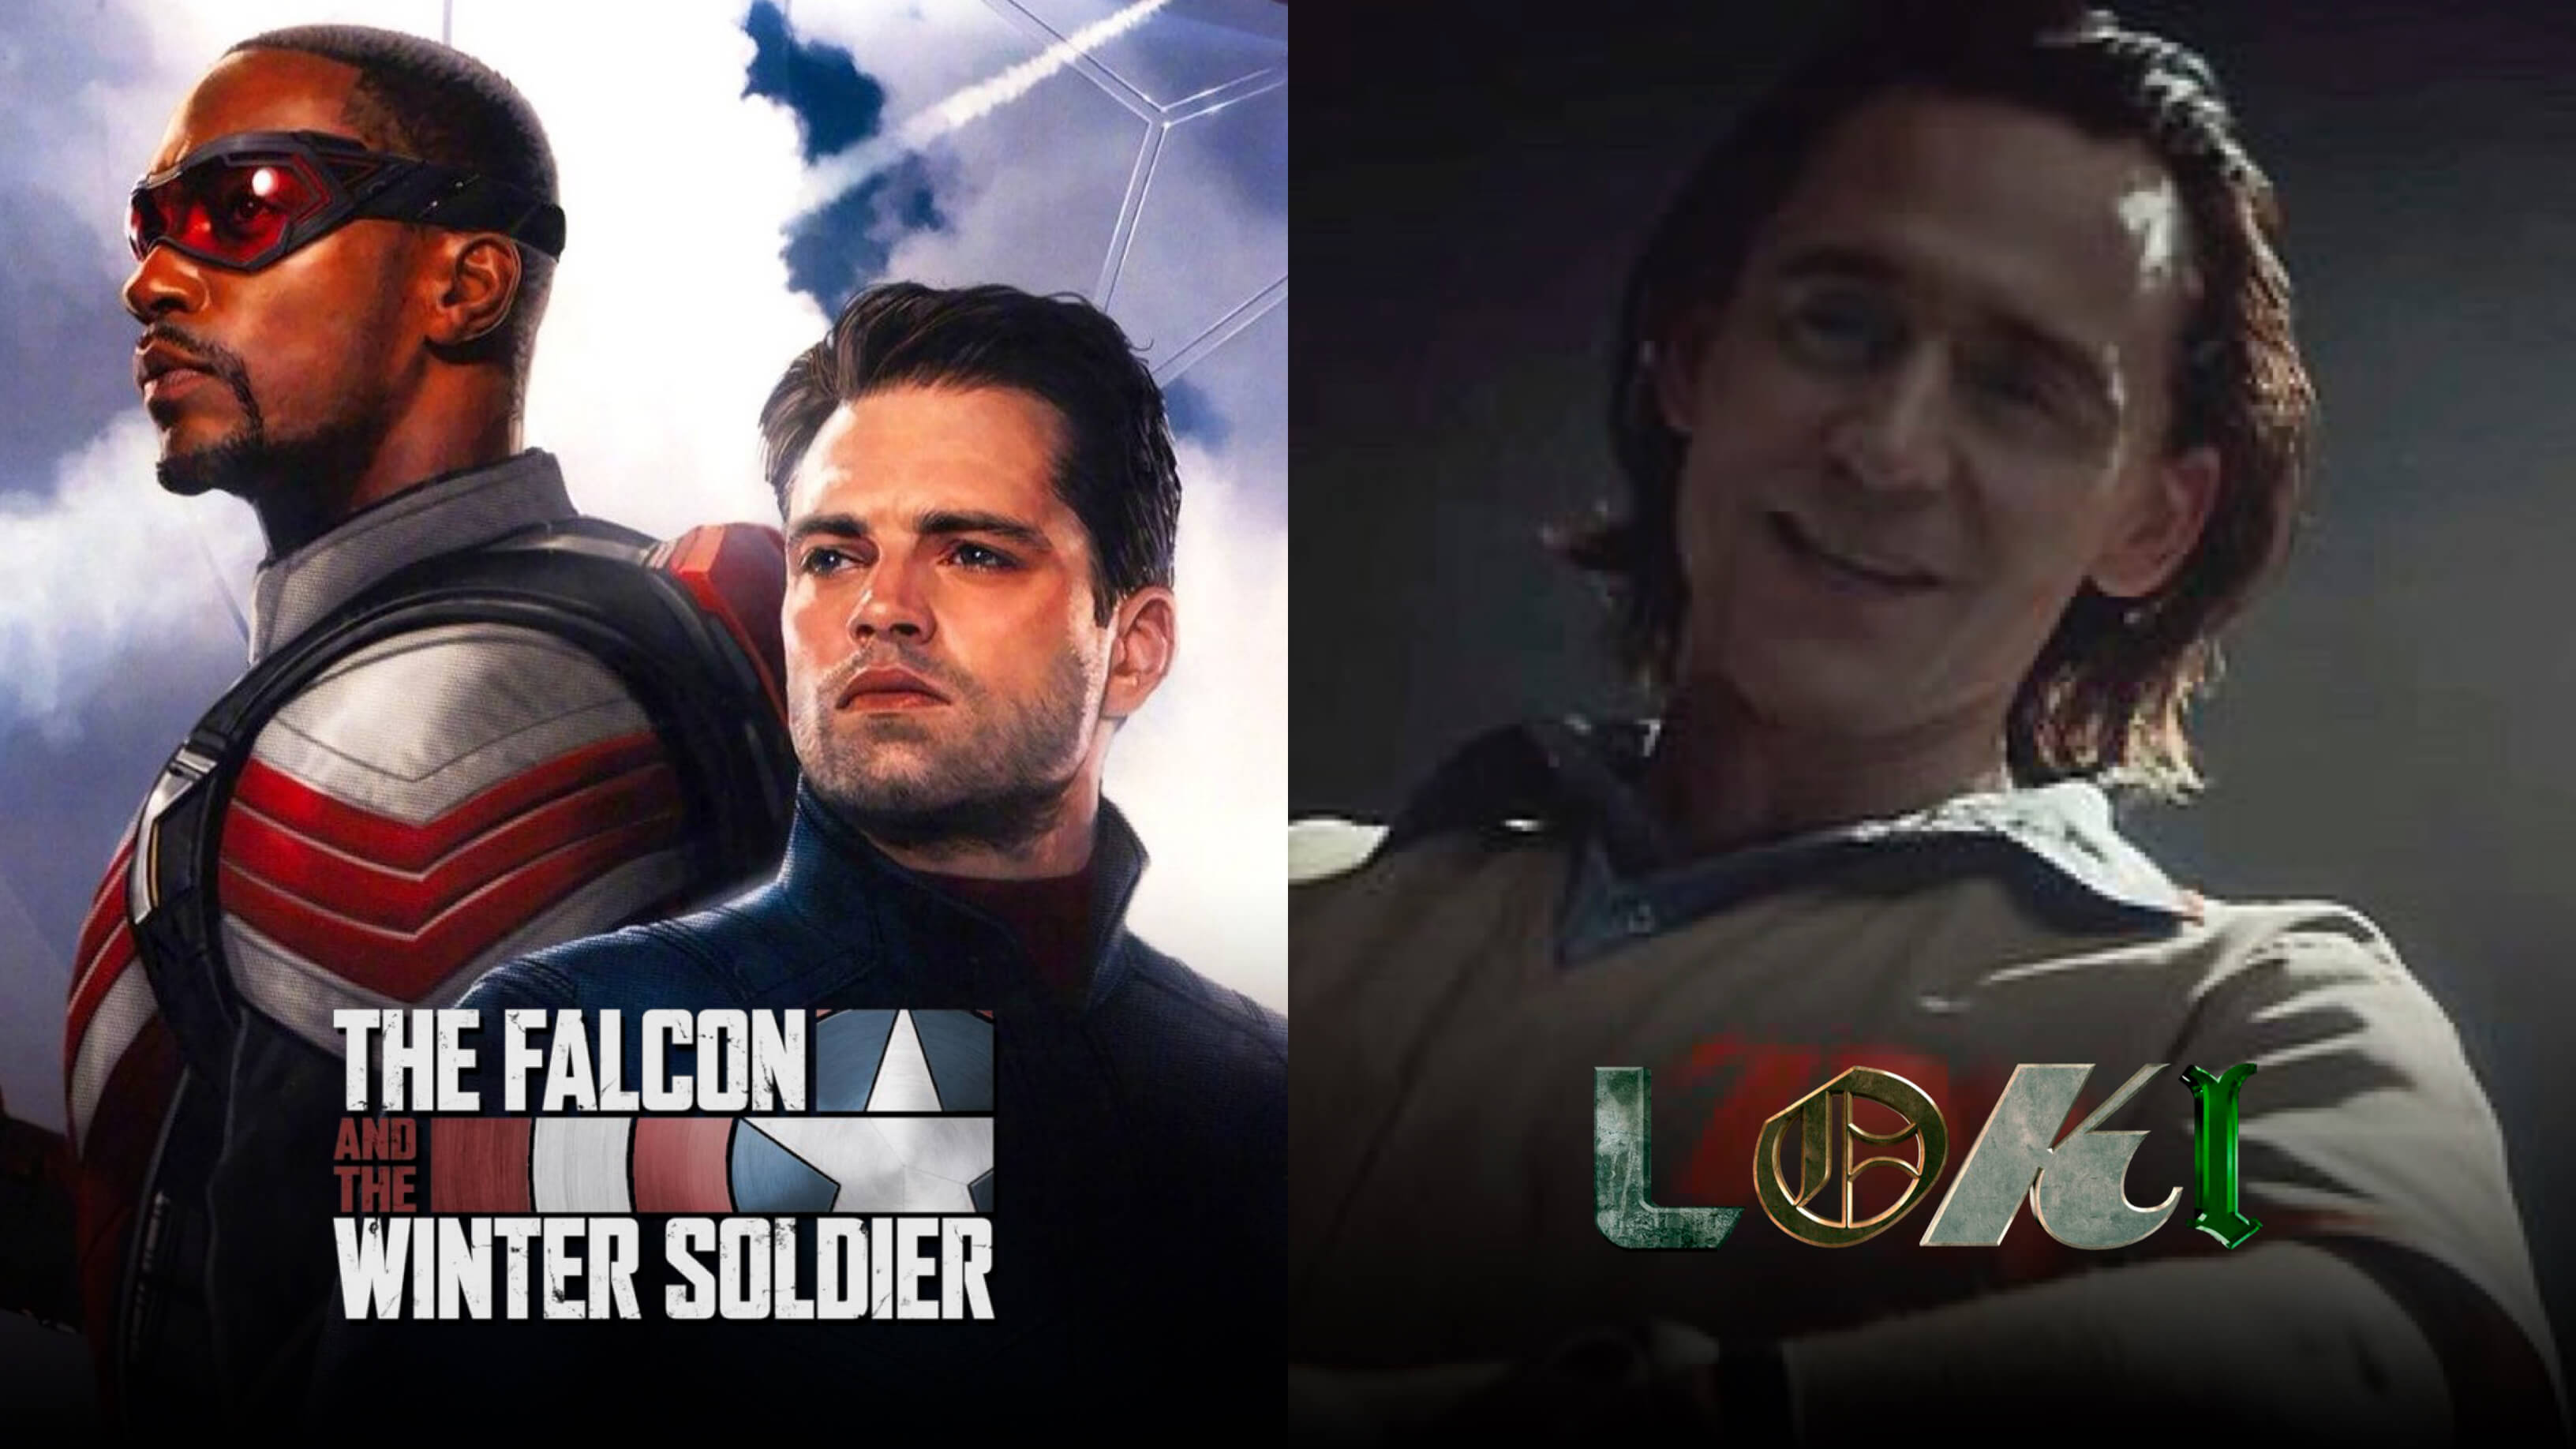 ‘The Falcon and the Winter Soldier’ and ‘Loki’ Are Expected to Resume Filming in August